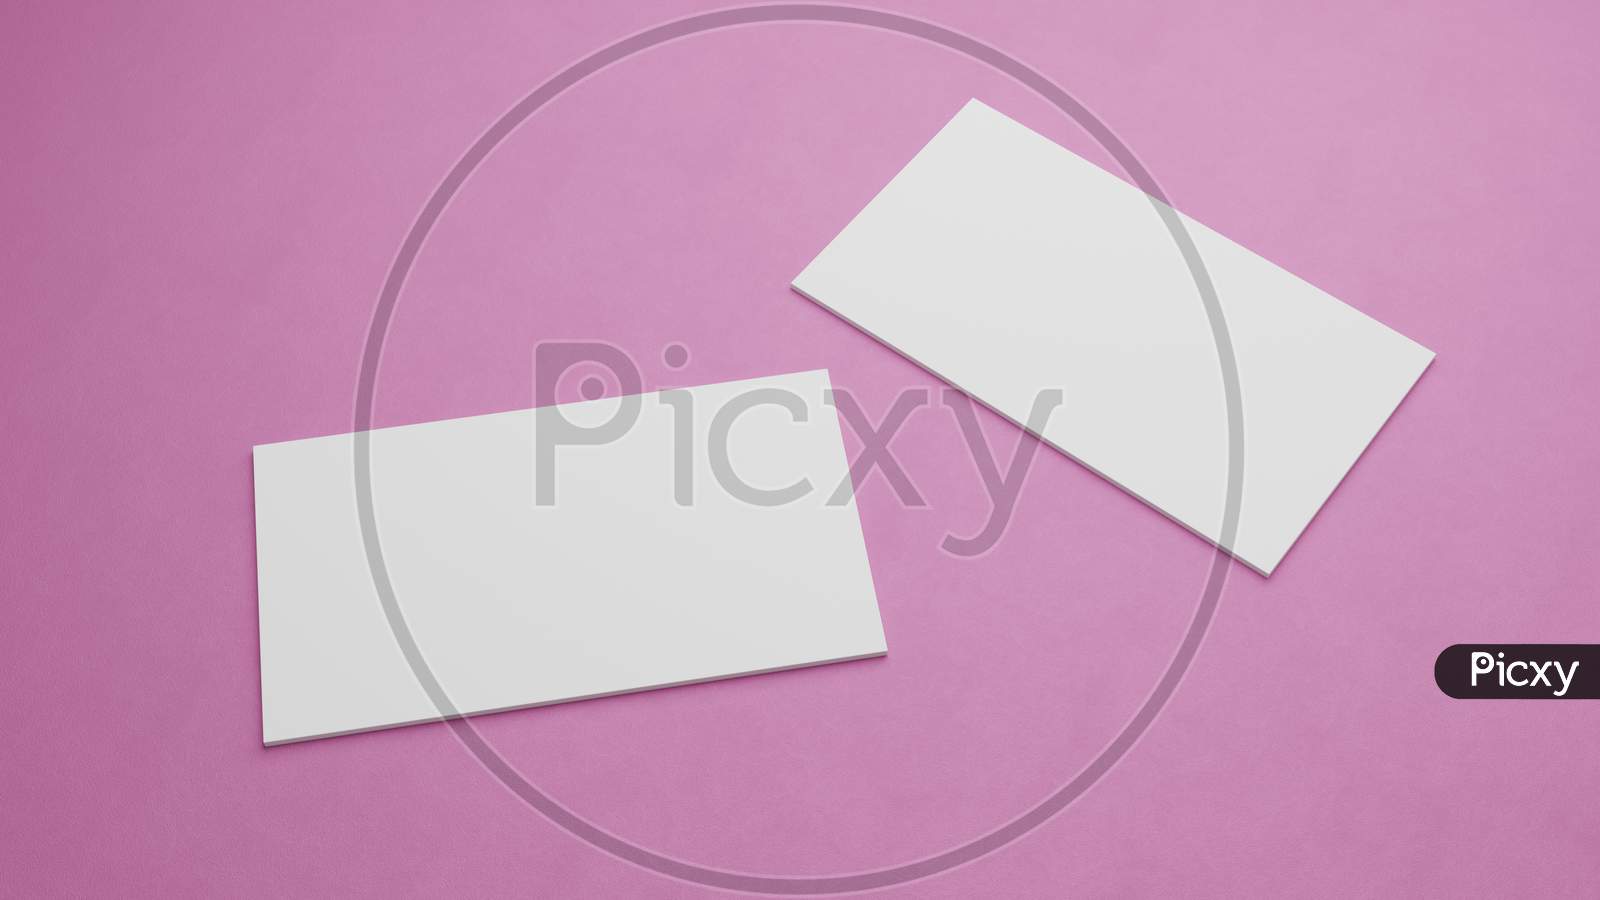 White Business Card Mockup Stacking On Pink Color Table Background. Object Background Concept For Brand Presentation Template Print. 3.5 X 2 Inch Paper Size Cover. 3D Illustration Rendering